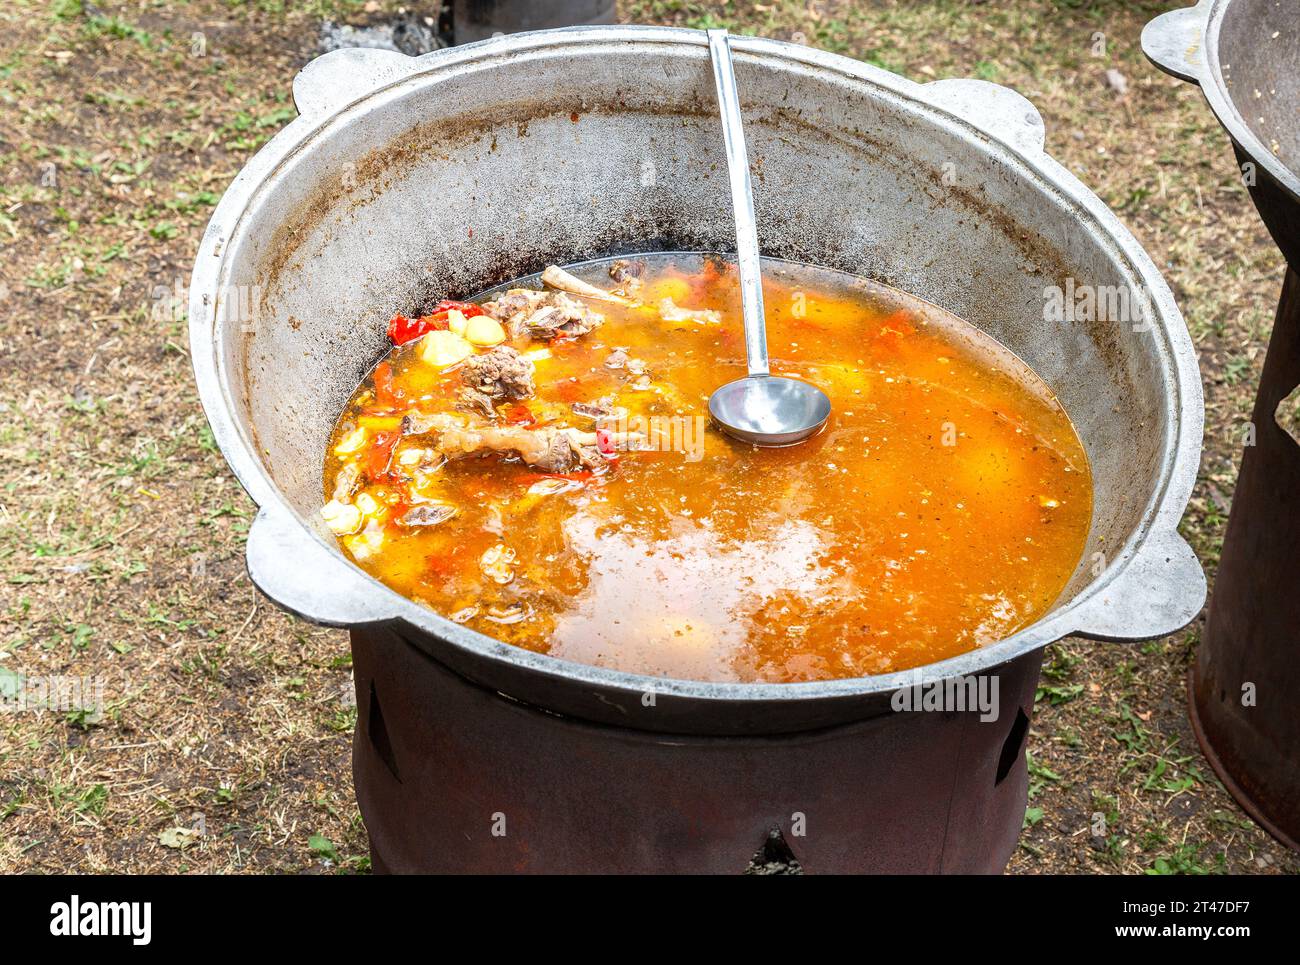 https://c8.alamy.com/comp/2T47DF7/cooking-in-a-large-cauldron-oriental-dishes-soup-soup-with-large-vegetables-and-meat-shurpa-in-a-large-cauldron-delicious-street-food-meat-soup-2T47DF7.jpg